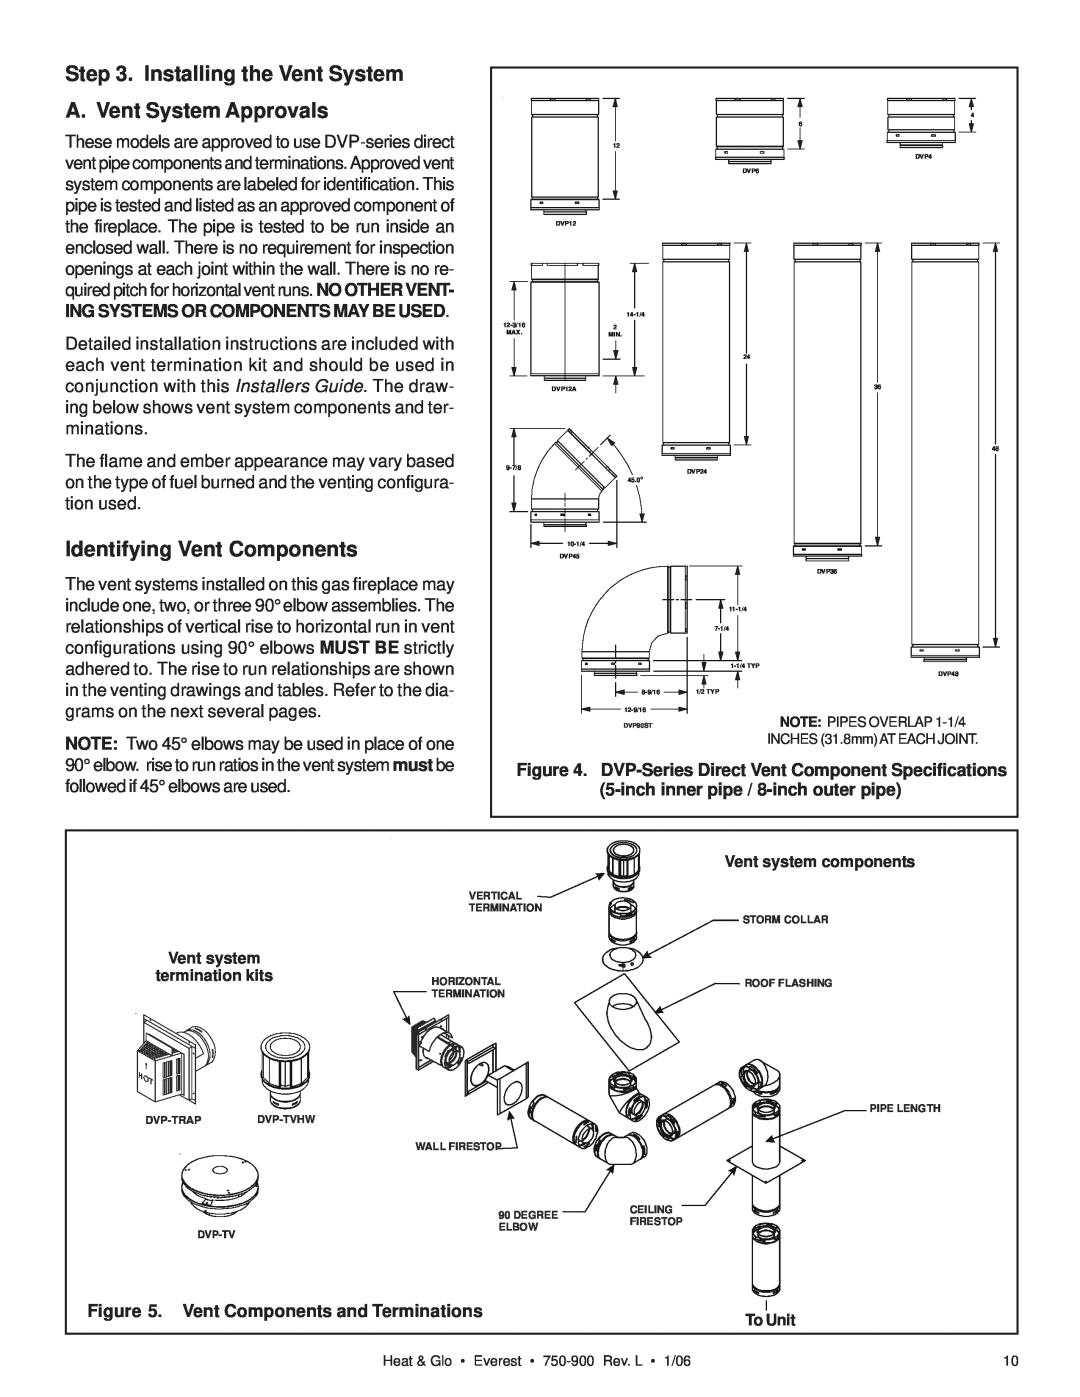 Heat & Glo LifeStyle EVEREST manual Identifying Vent Components, Ing Systems Or Components May Be Used 